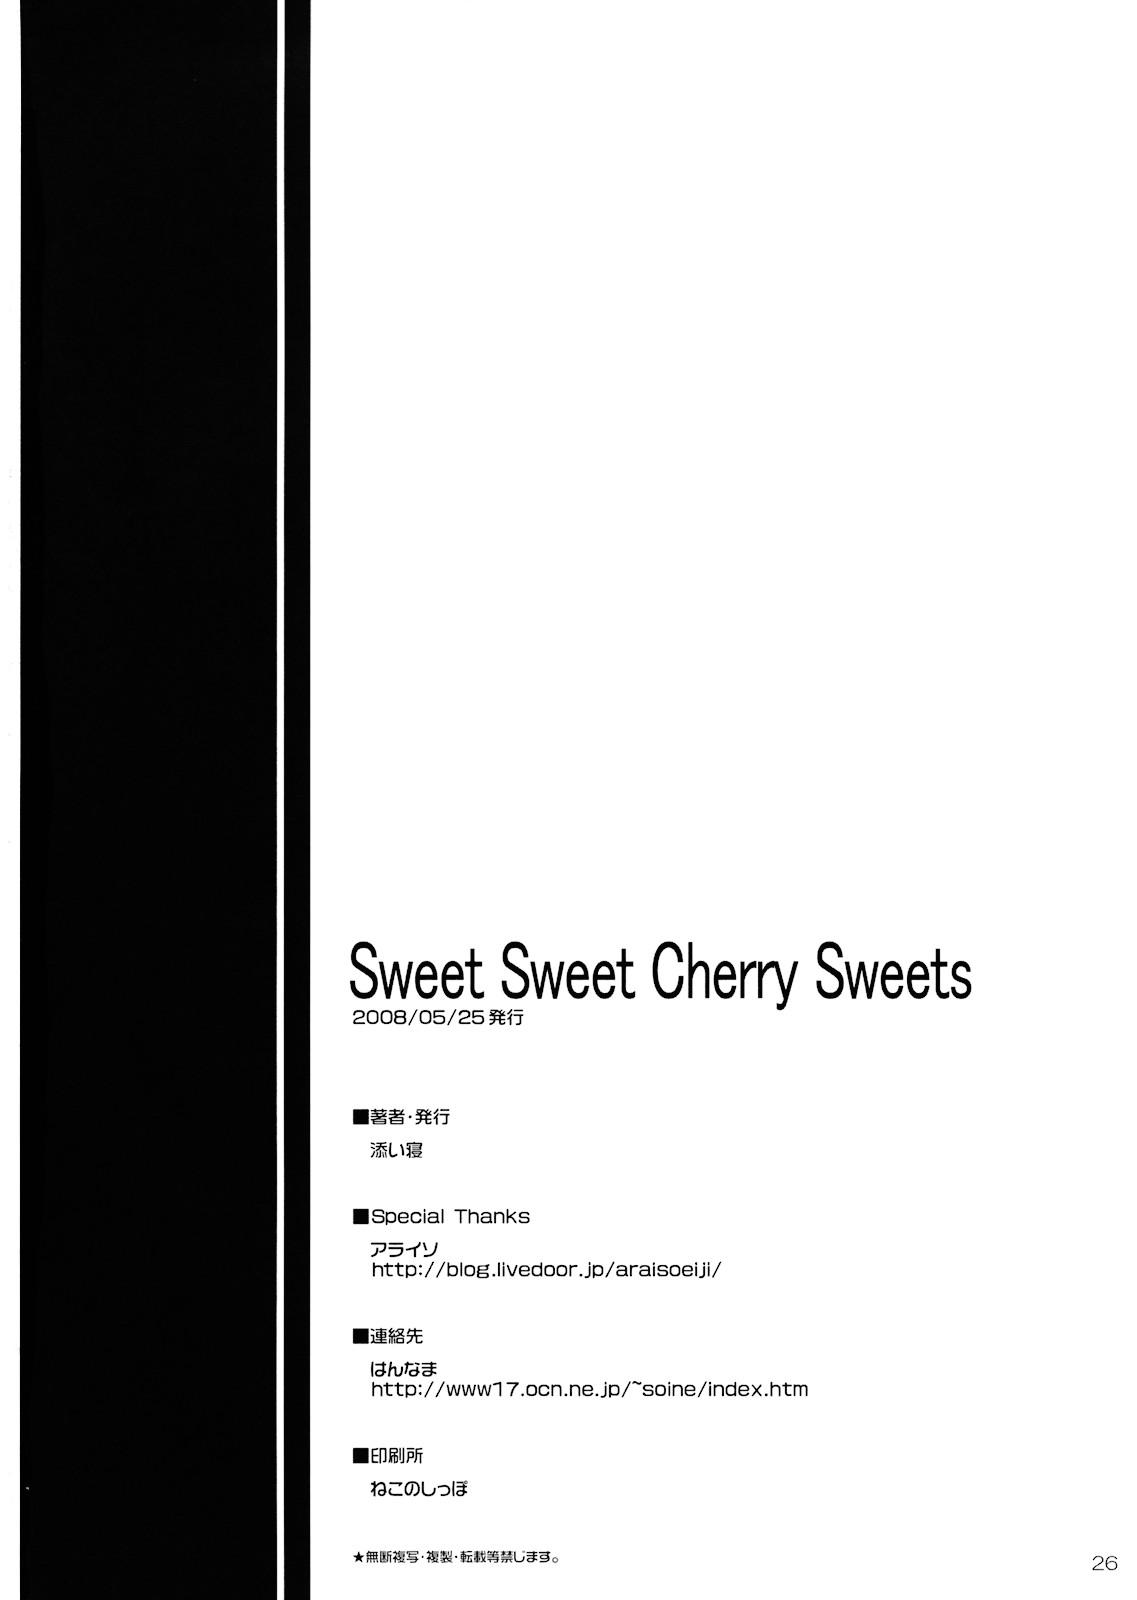 Sexo Sweet Sweet Cherry Sweets - Touhou project Jerking - Page 26